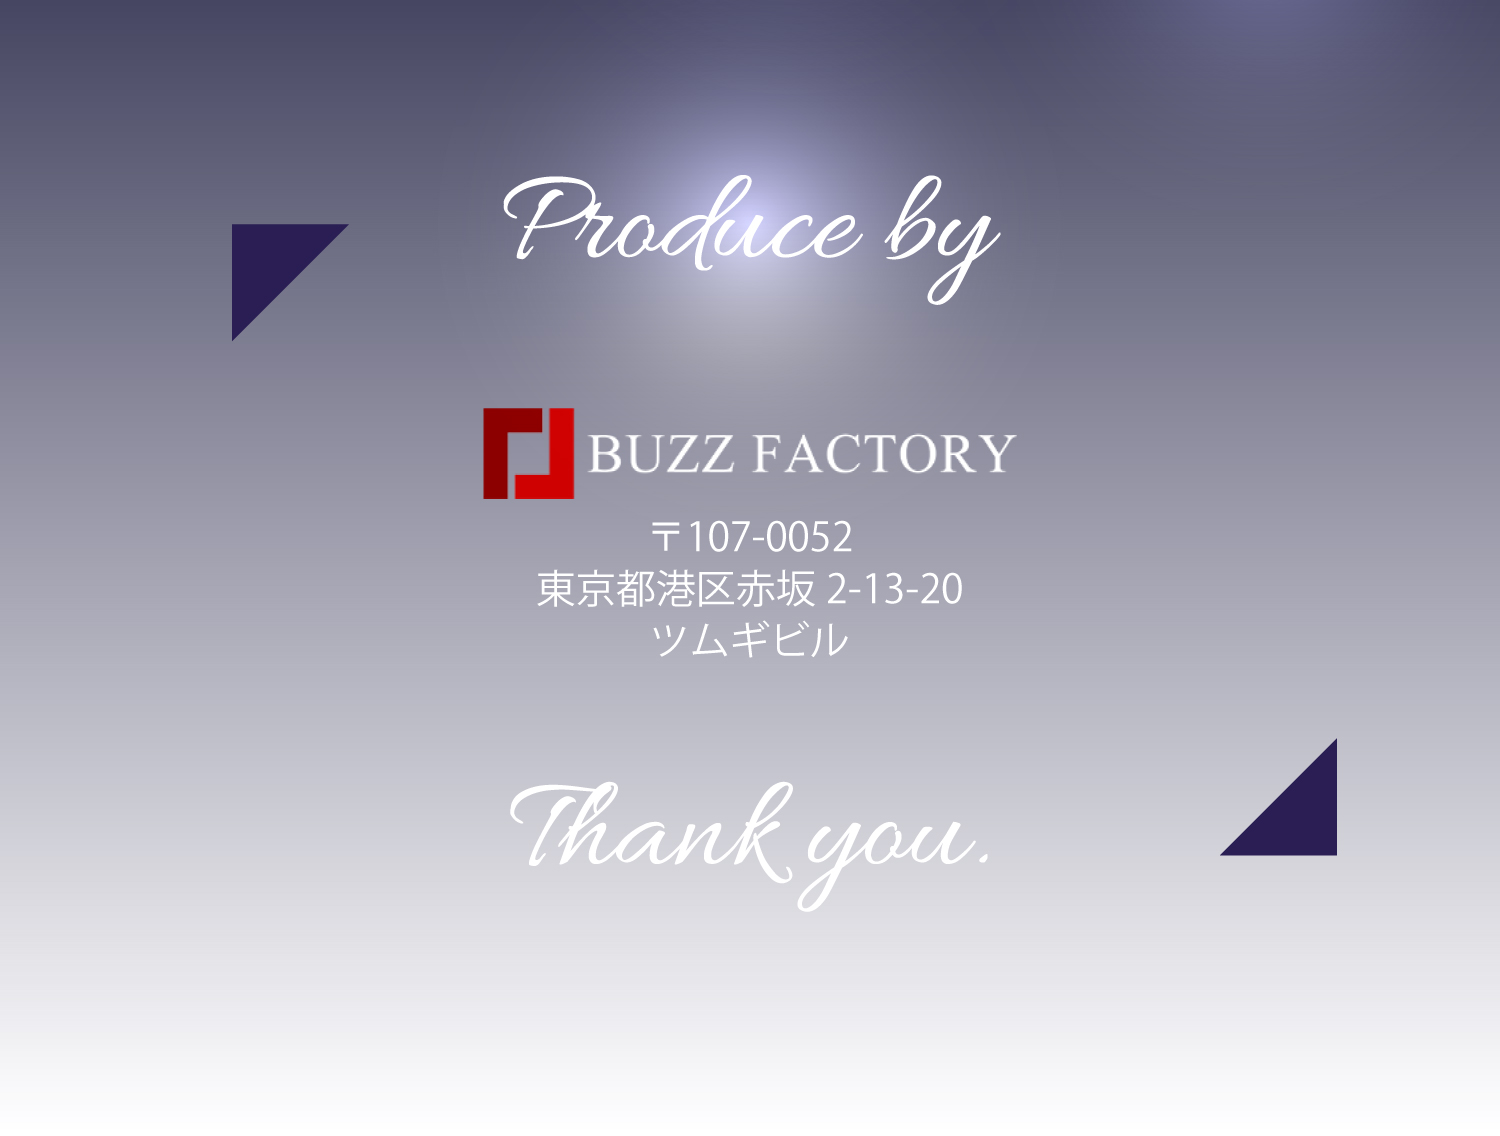 Produce by BUZZ FACTORY